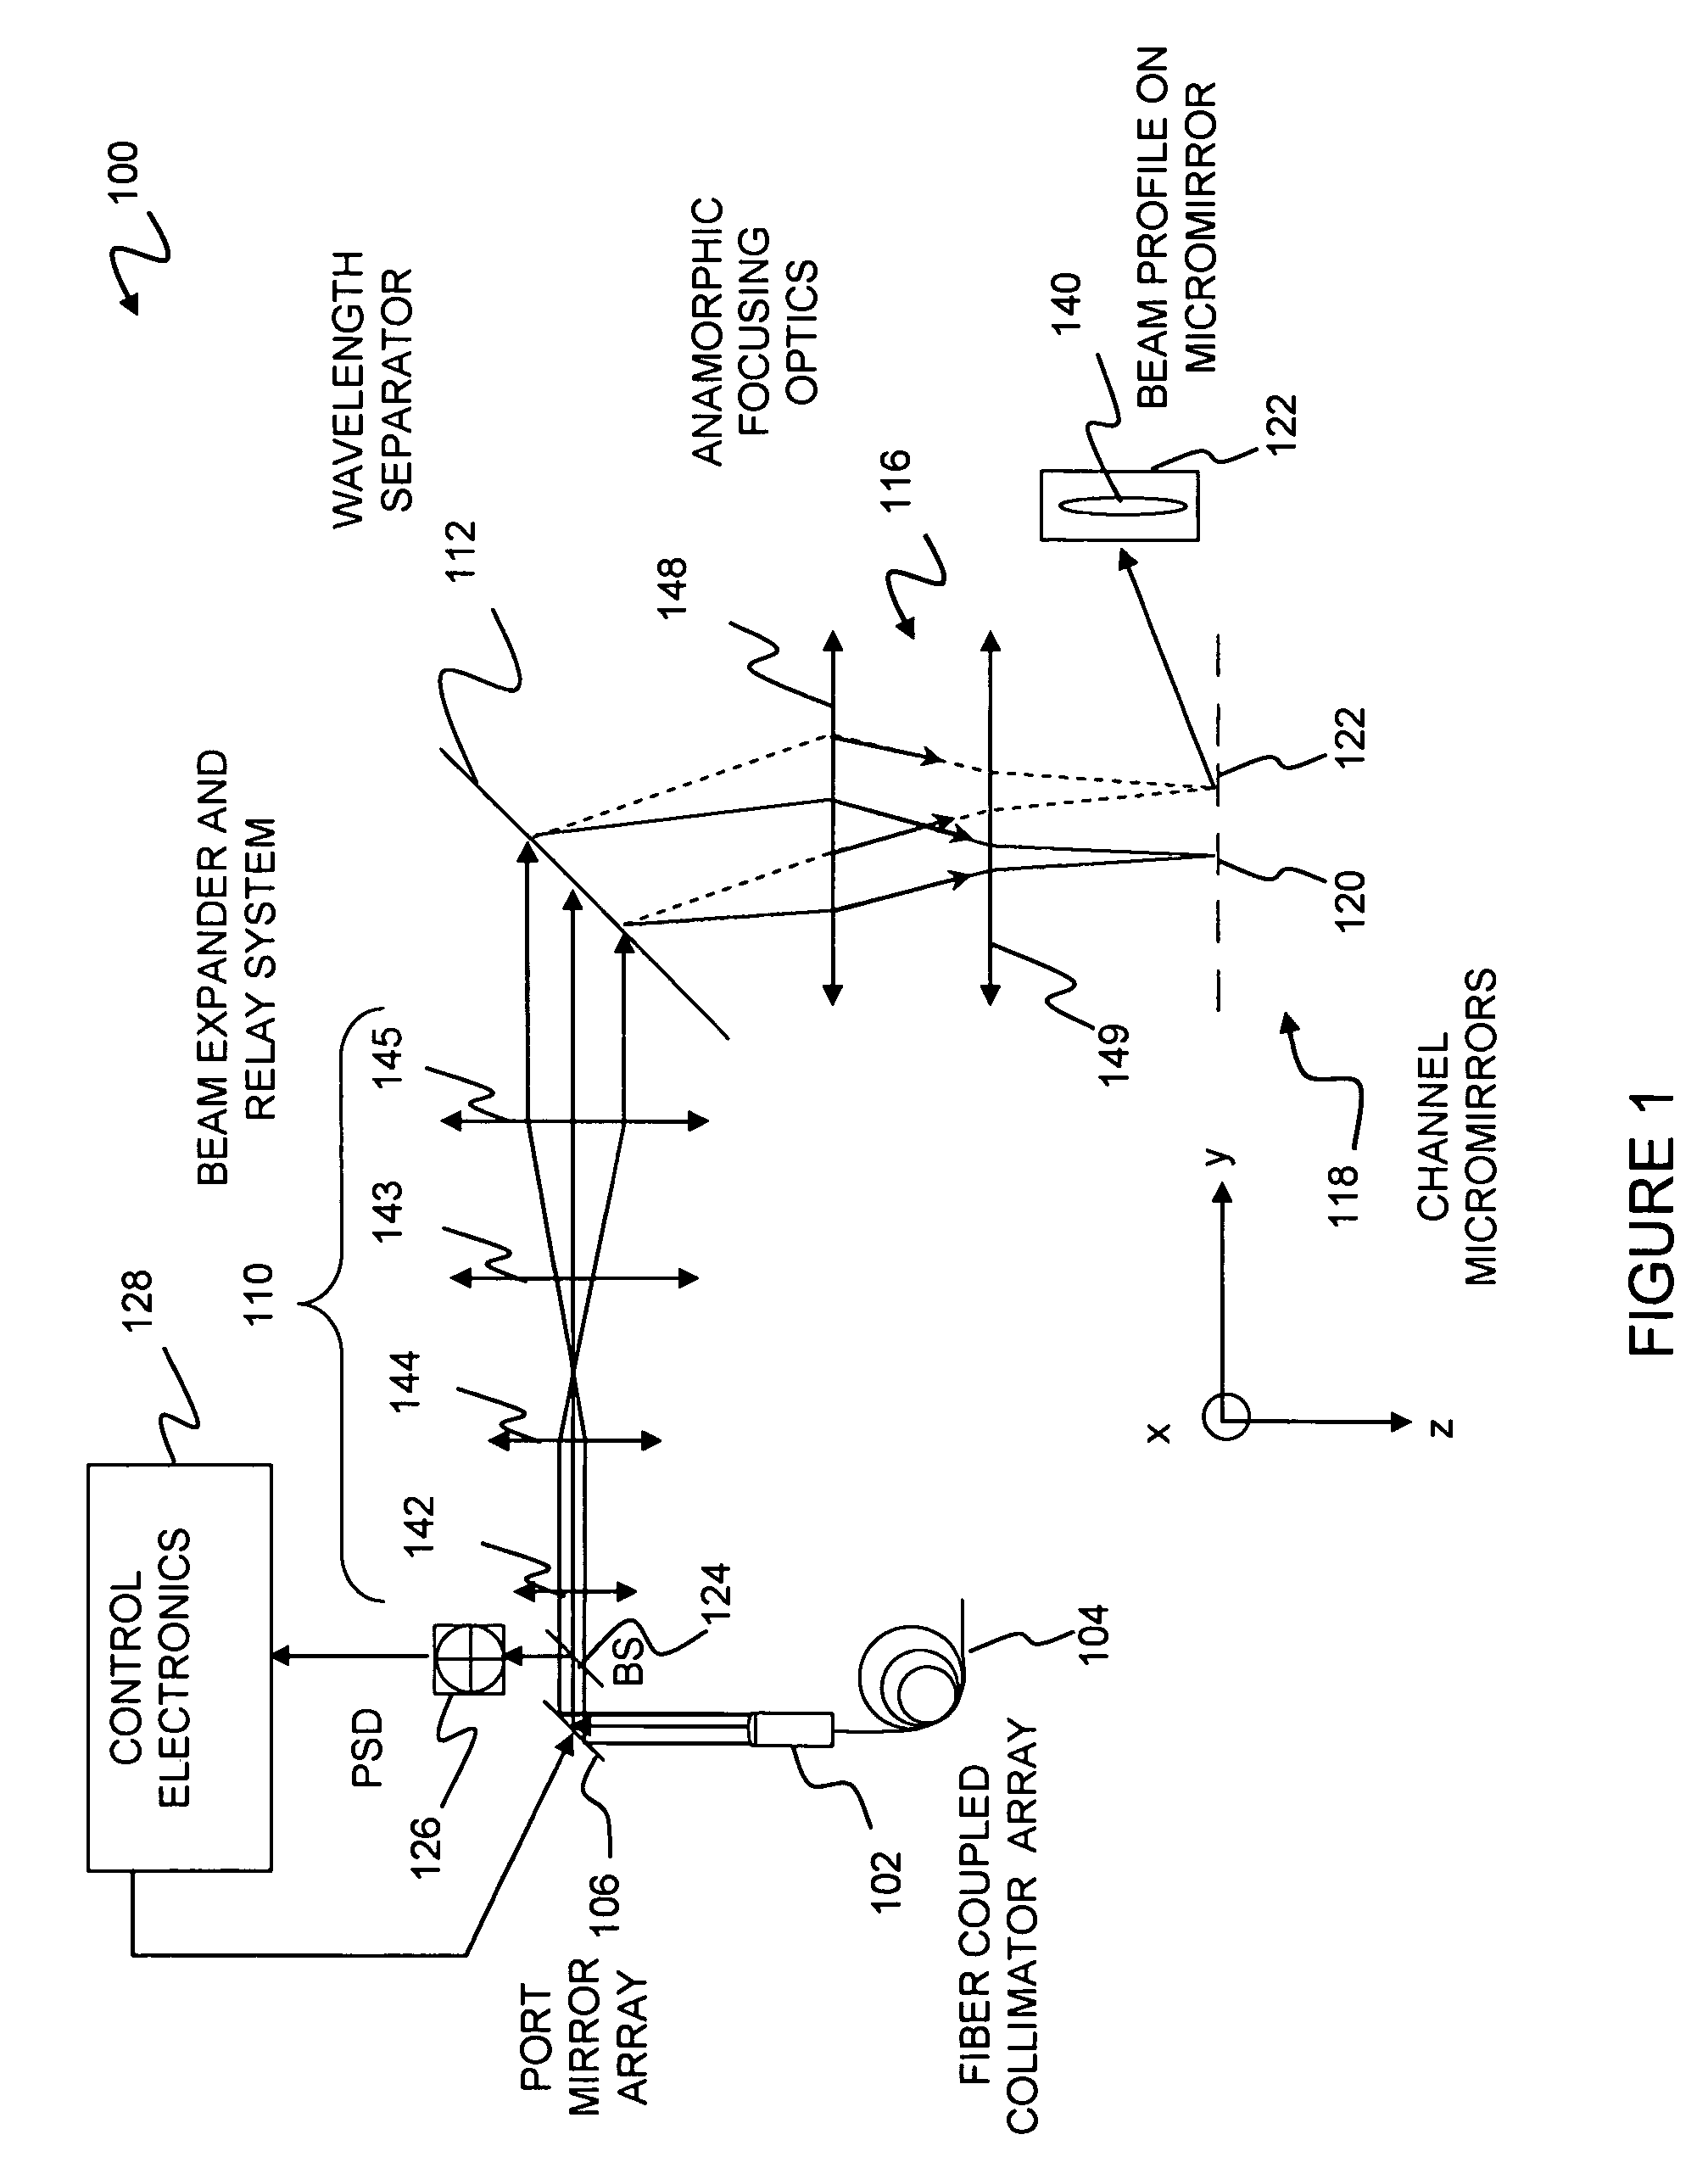 Optical apparatus with reduced effect of mirror edge diffraction